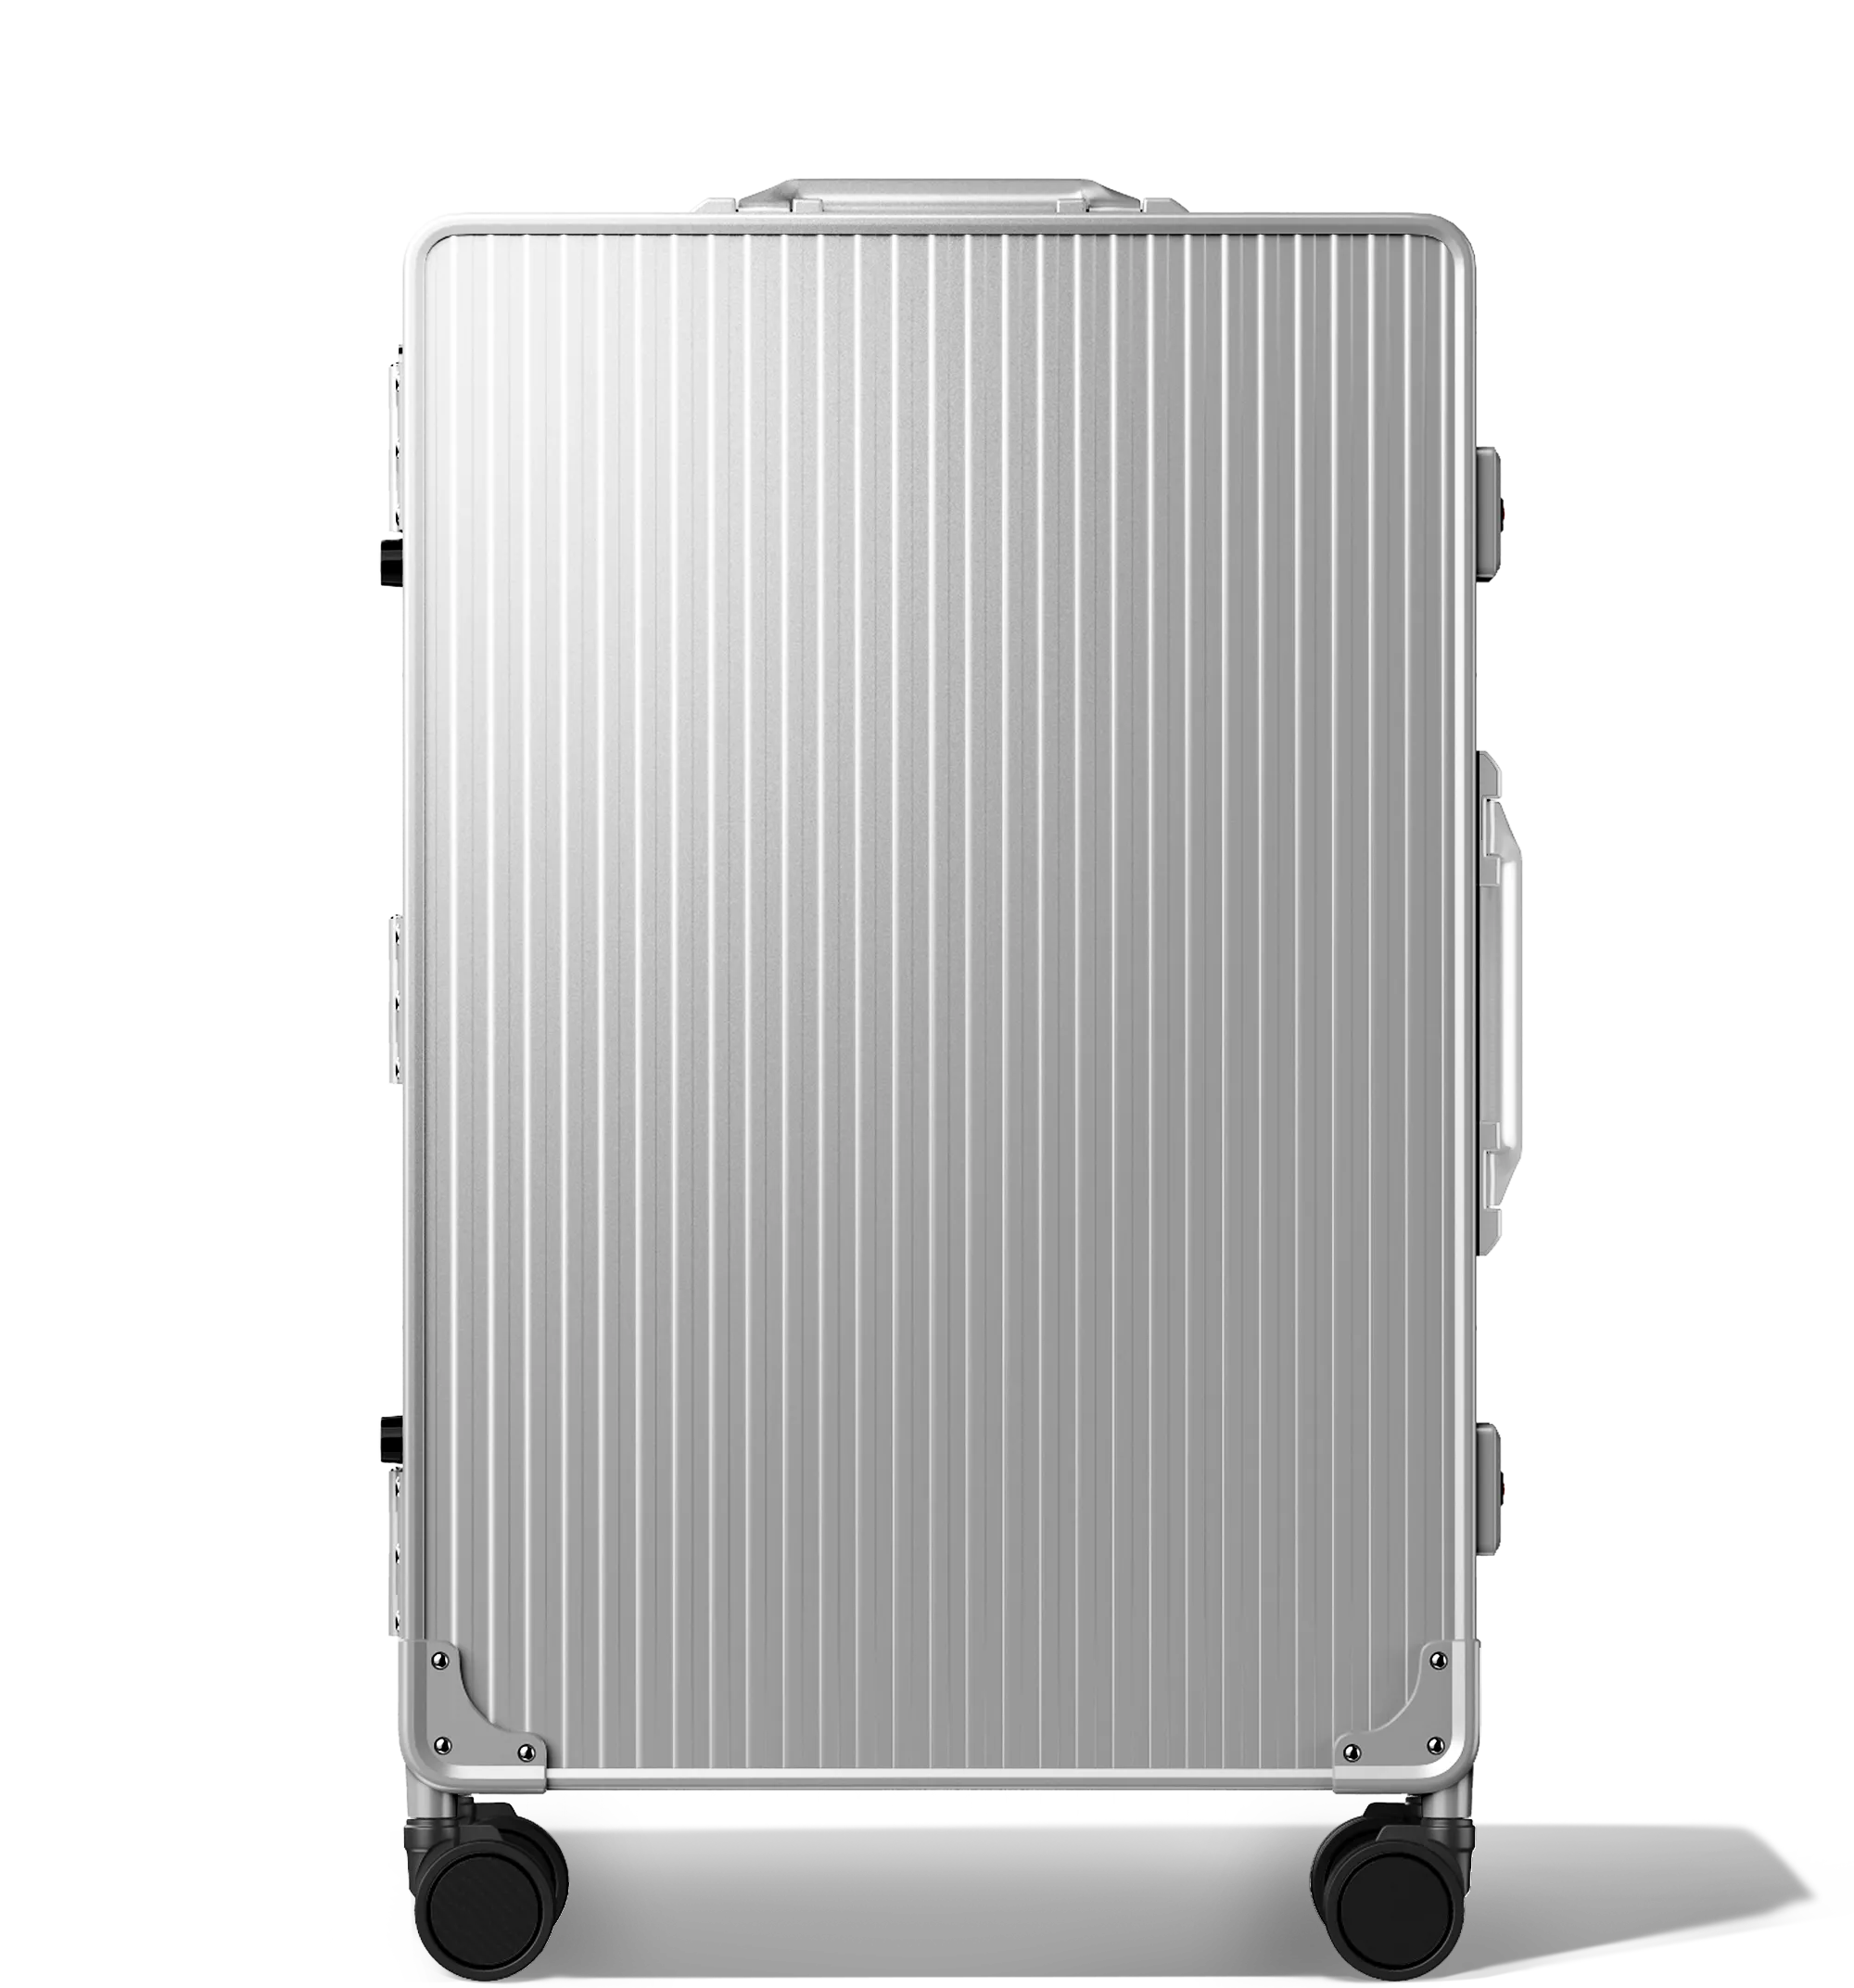 A vertical image of a Check-In 65/25 luggage , upright, Silver hard-shell aluminium Luggage with a grooved surface design and multi-directional wheels, shown against a white background.